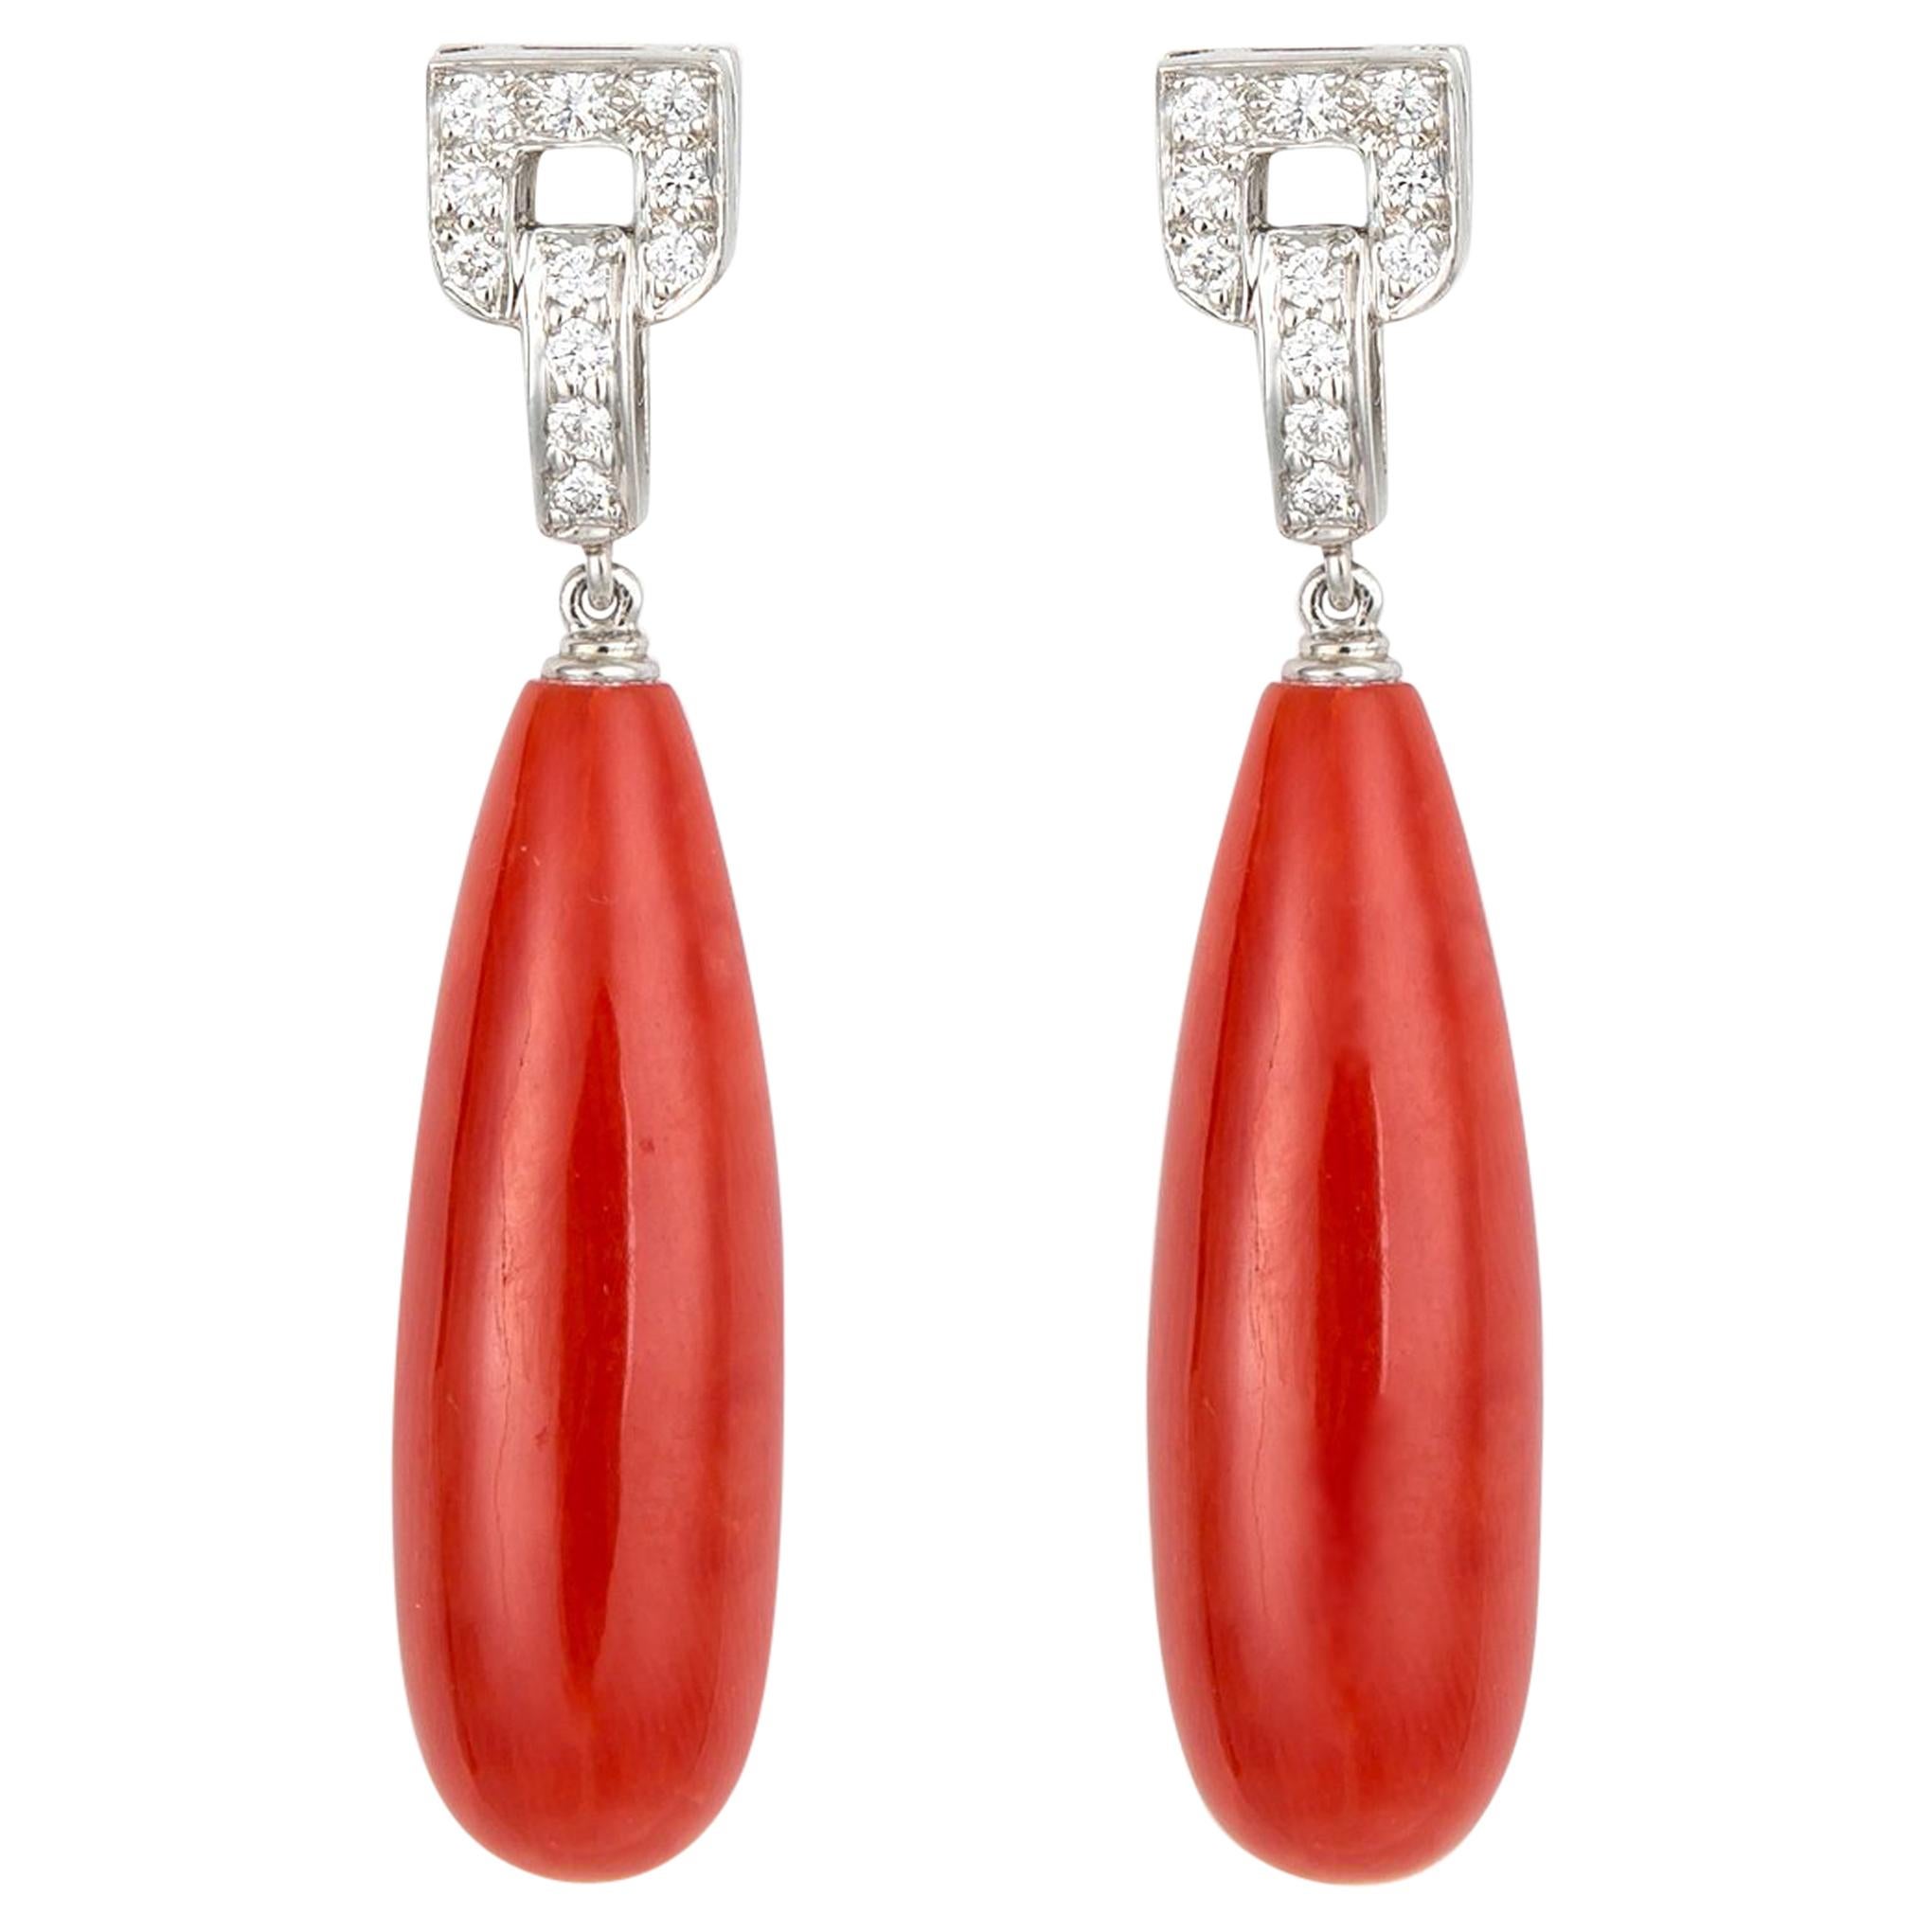  Tiffany & Co. Platinum Diamond and Coral Drop Earrings